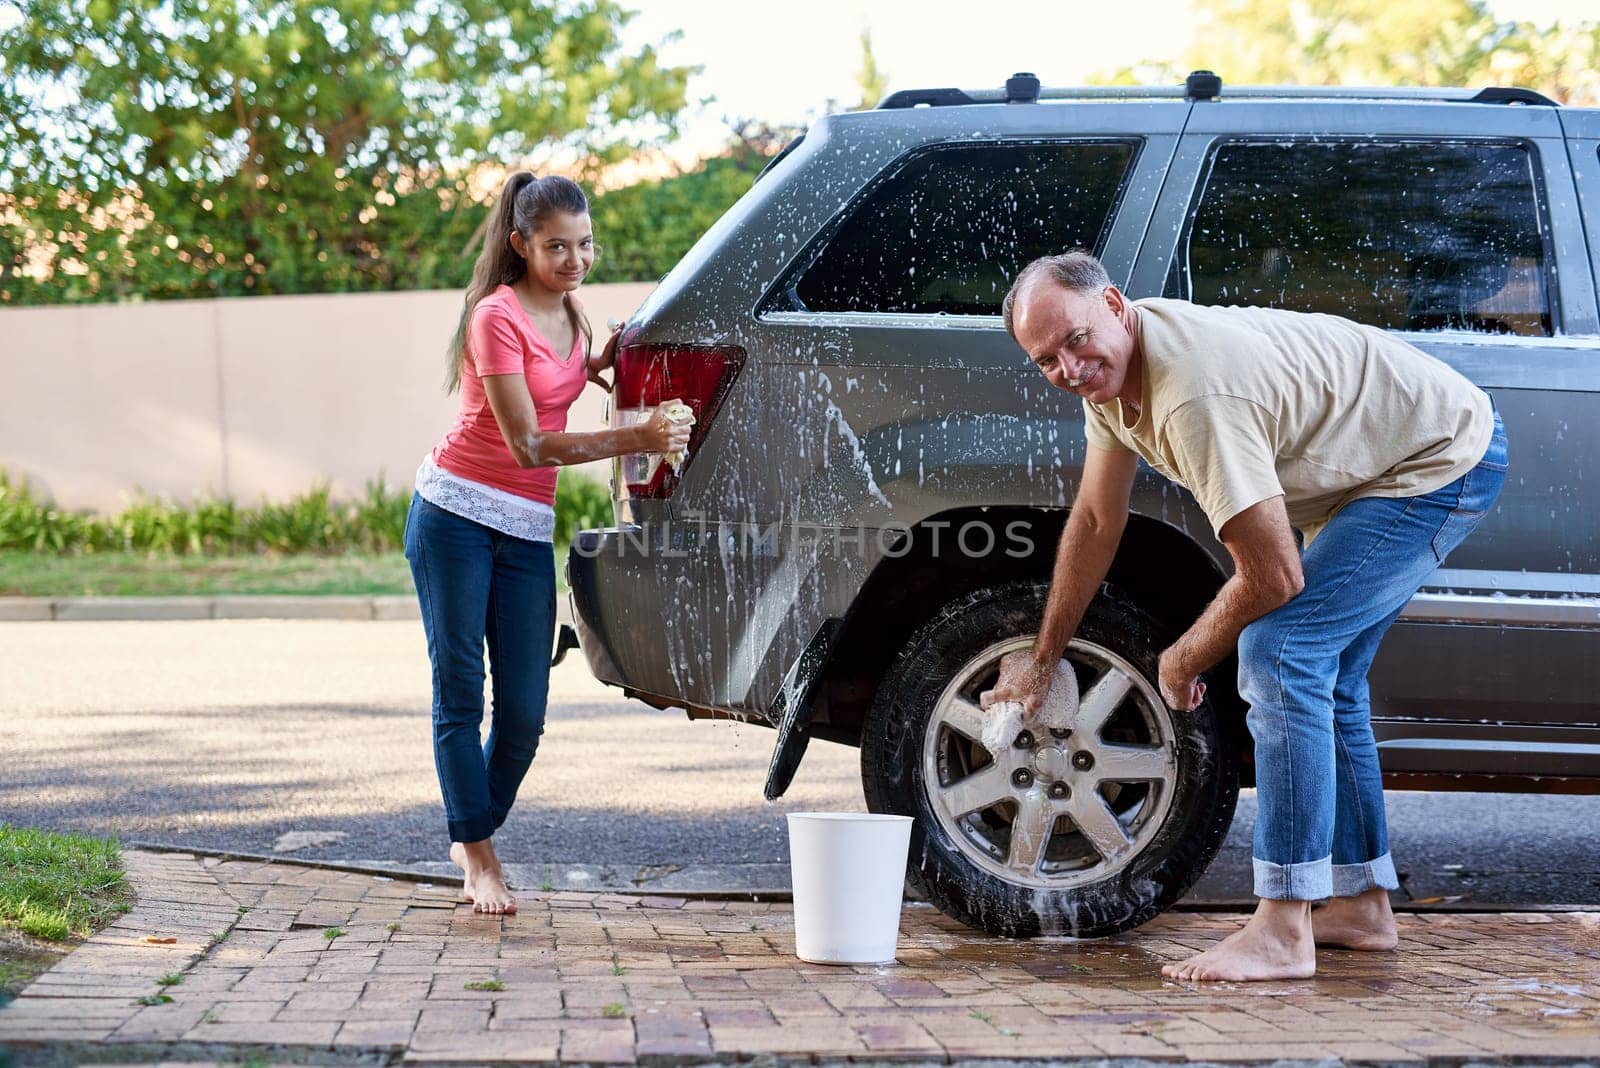 Portrait, family and washing car with soap, cloth and quality time on driveway. Cleaning transport, outdoor and face of father with young daughter with water, barefoot together and weekend chores.